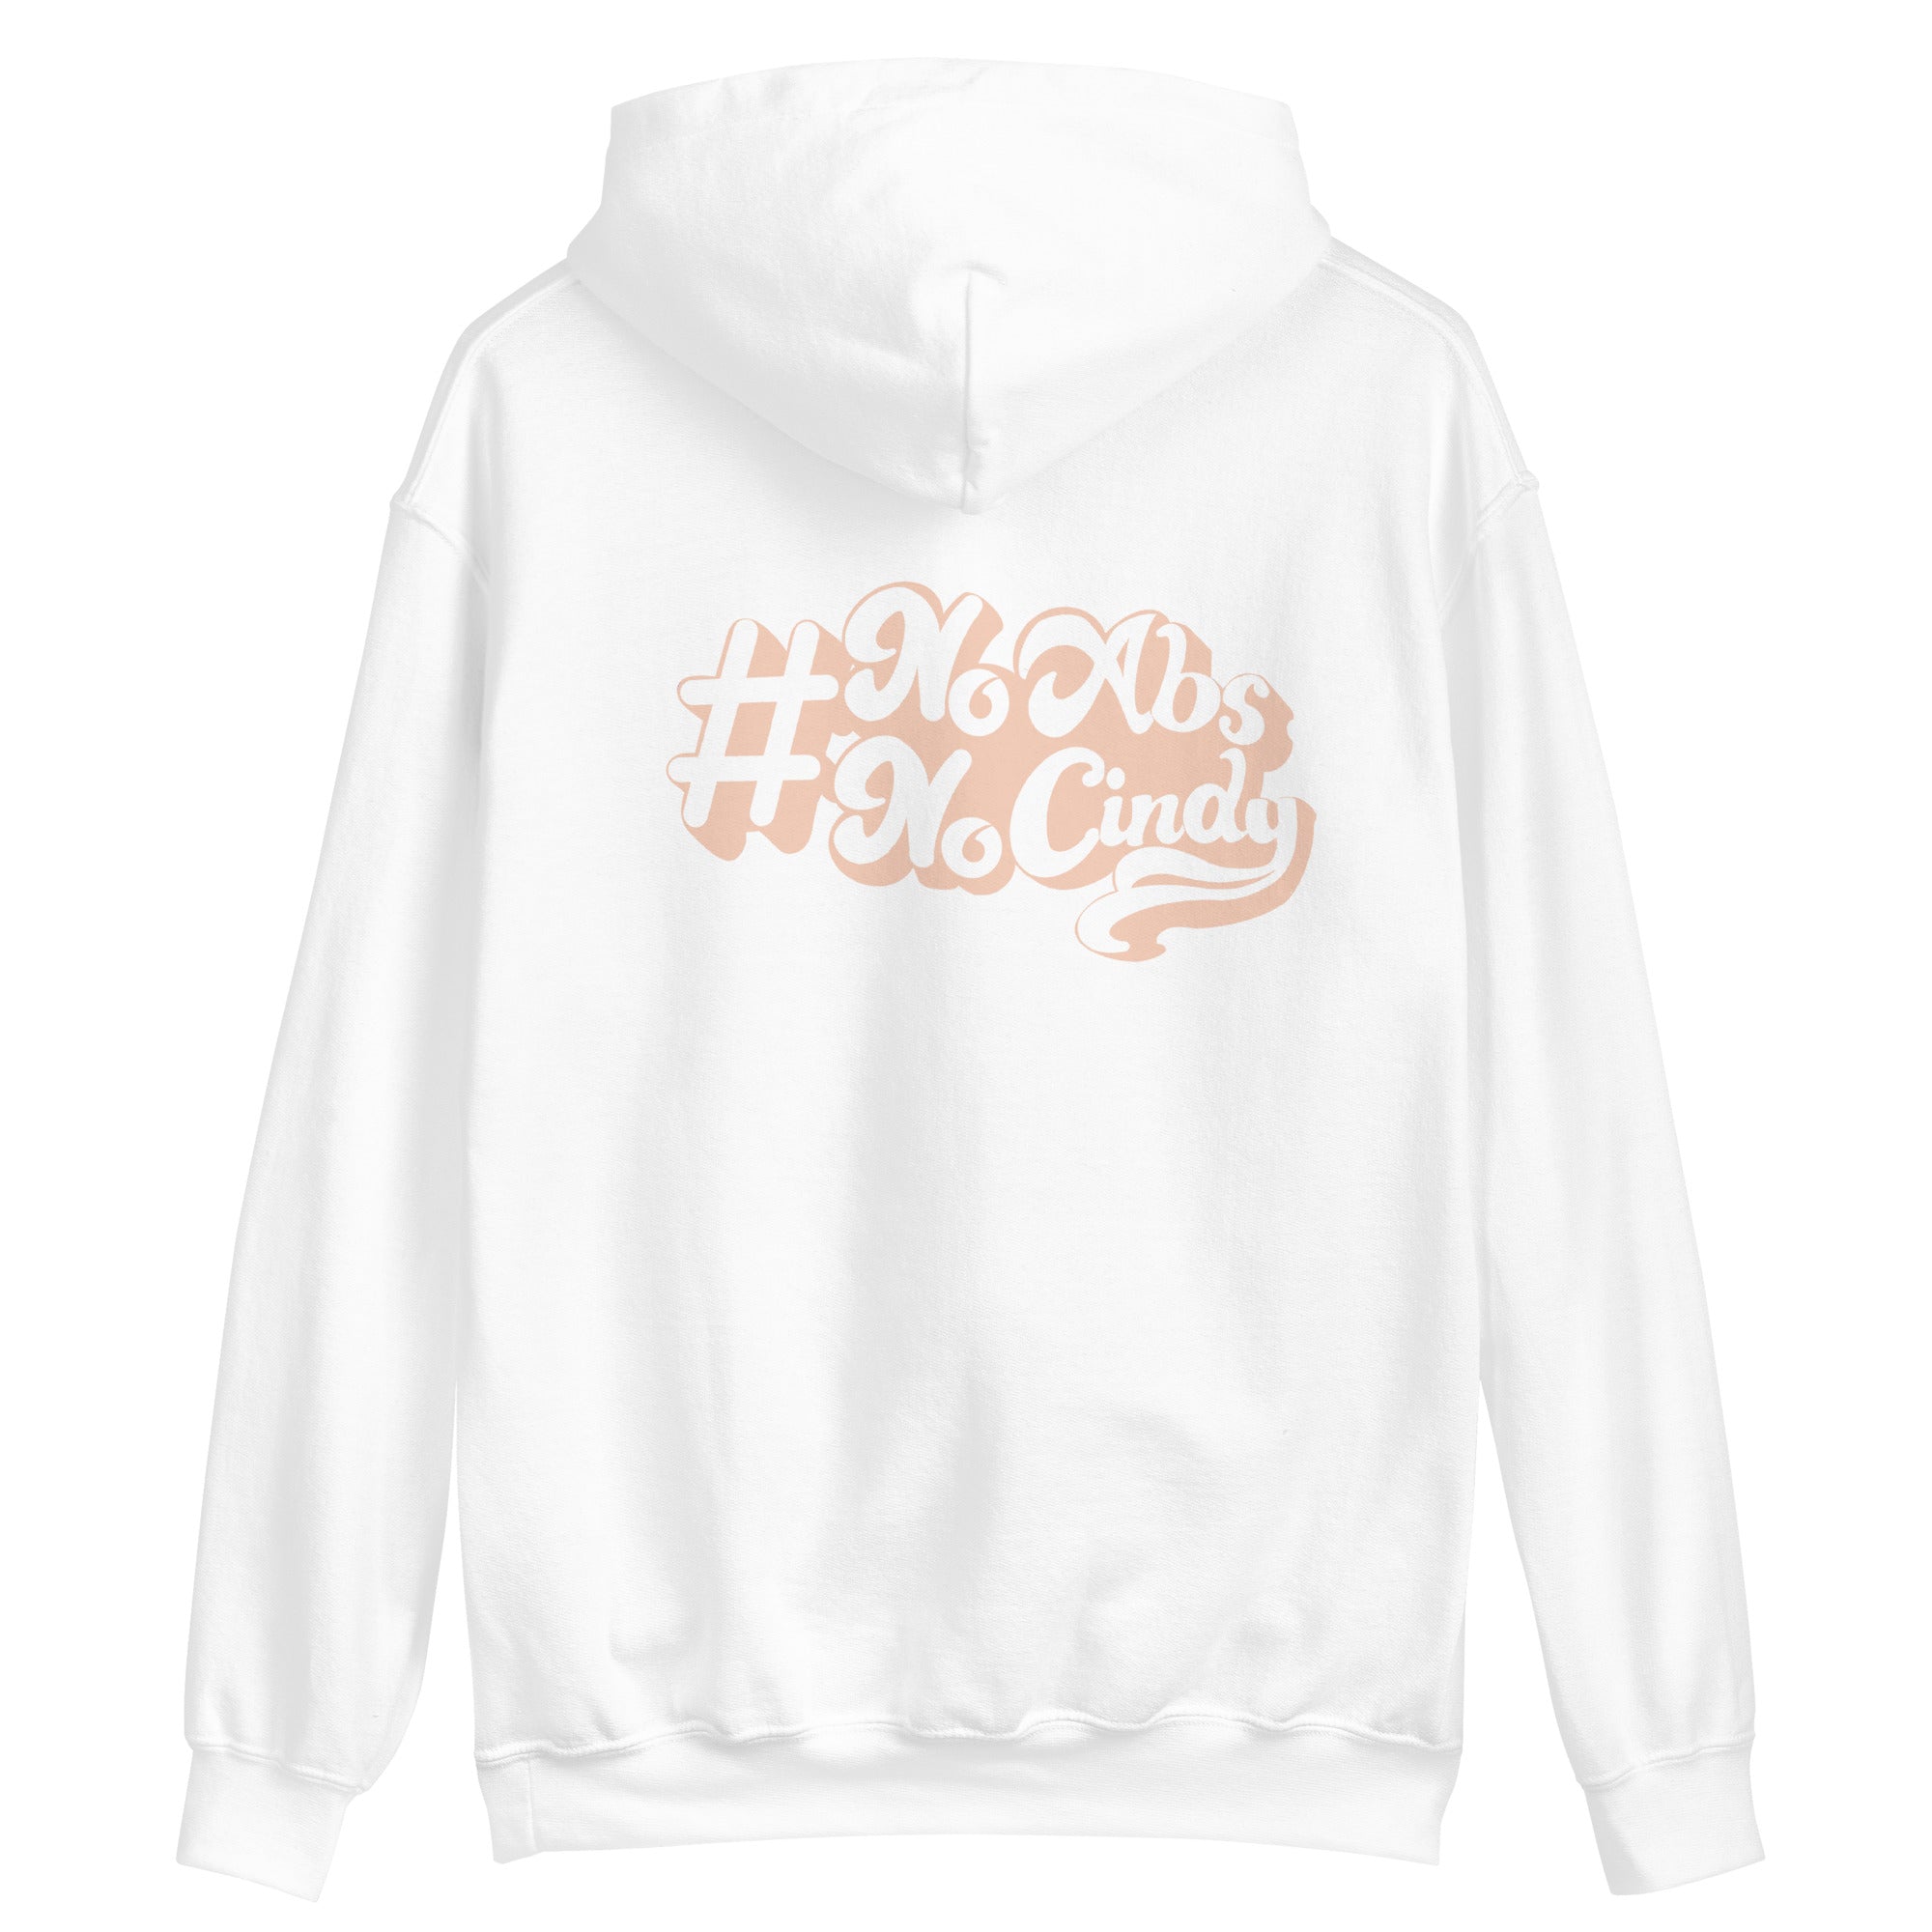 No Abs No Cindy - Back Unisex Hoodie